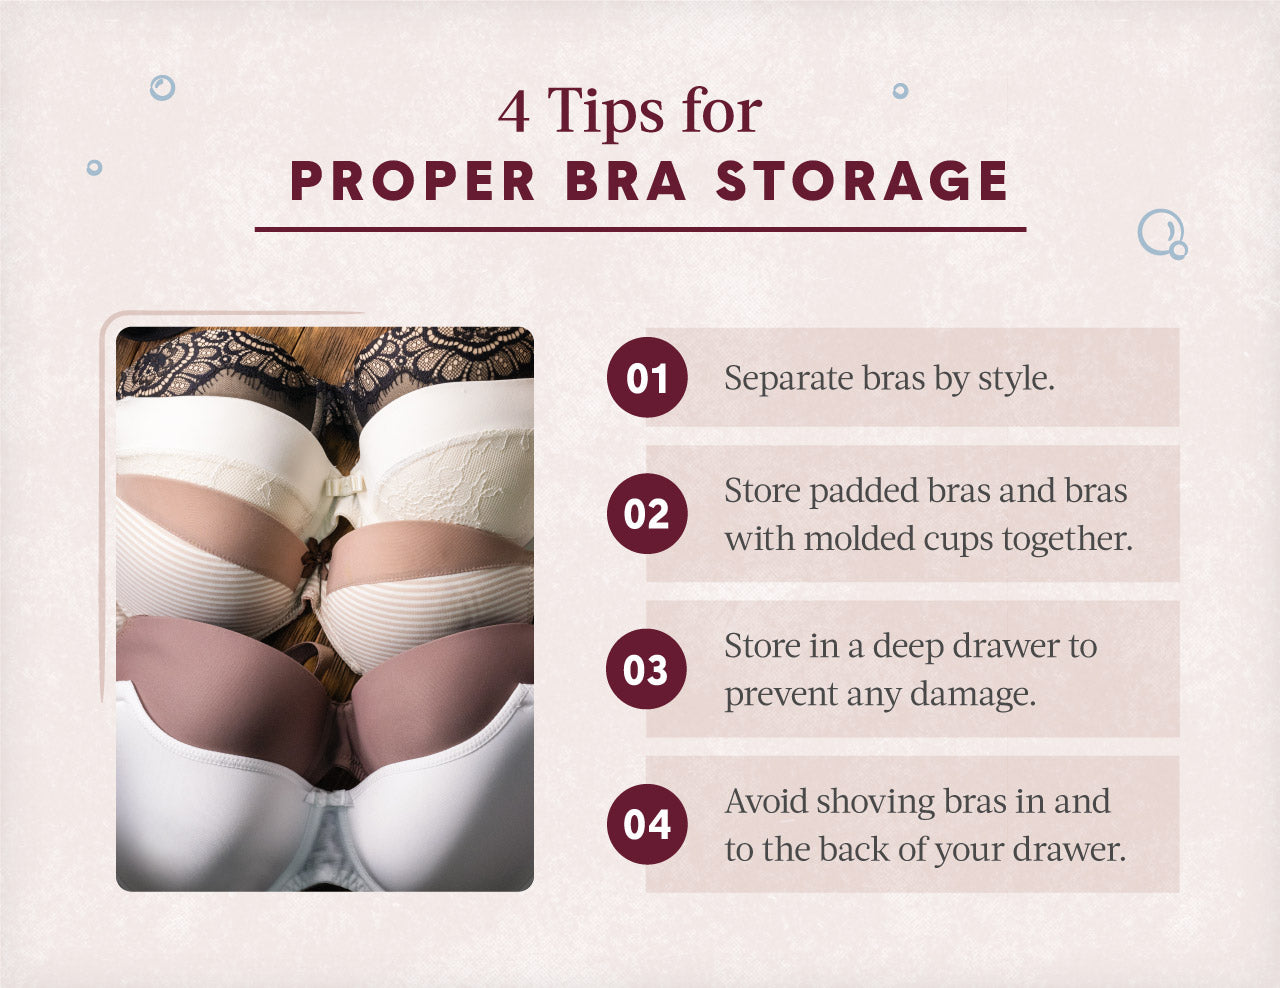 How To Wash Your Bras Properly To Make Them Feel Like New (& Last